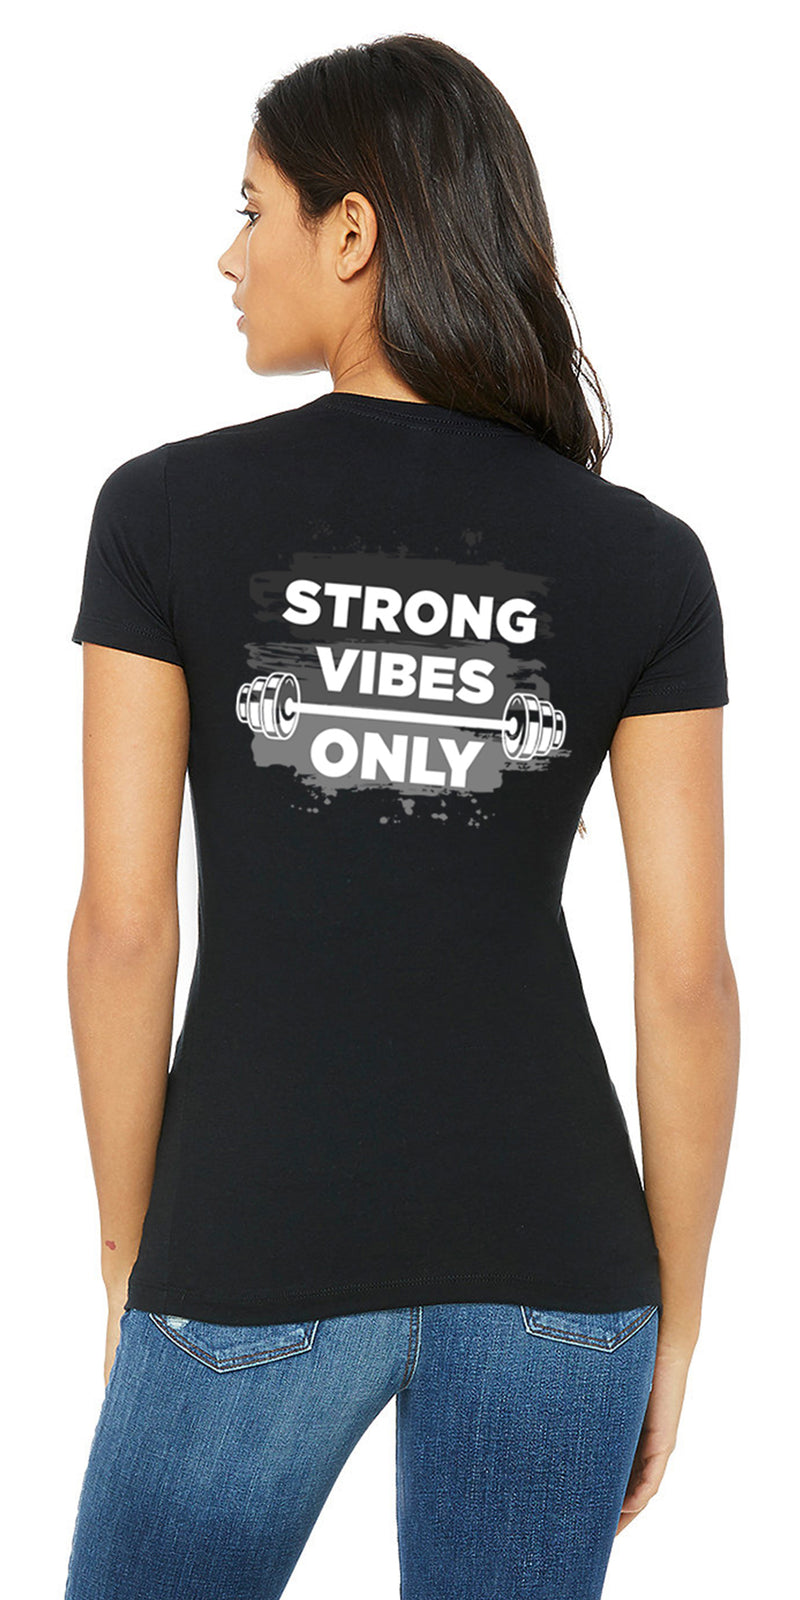 Strong Vibes Only - Shirt